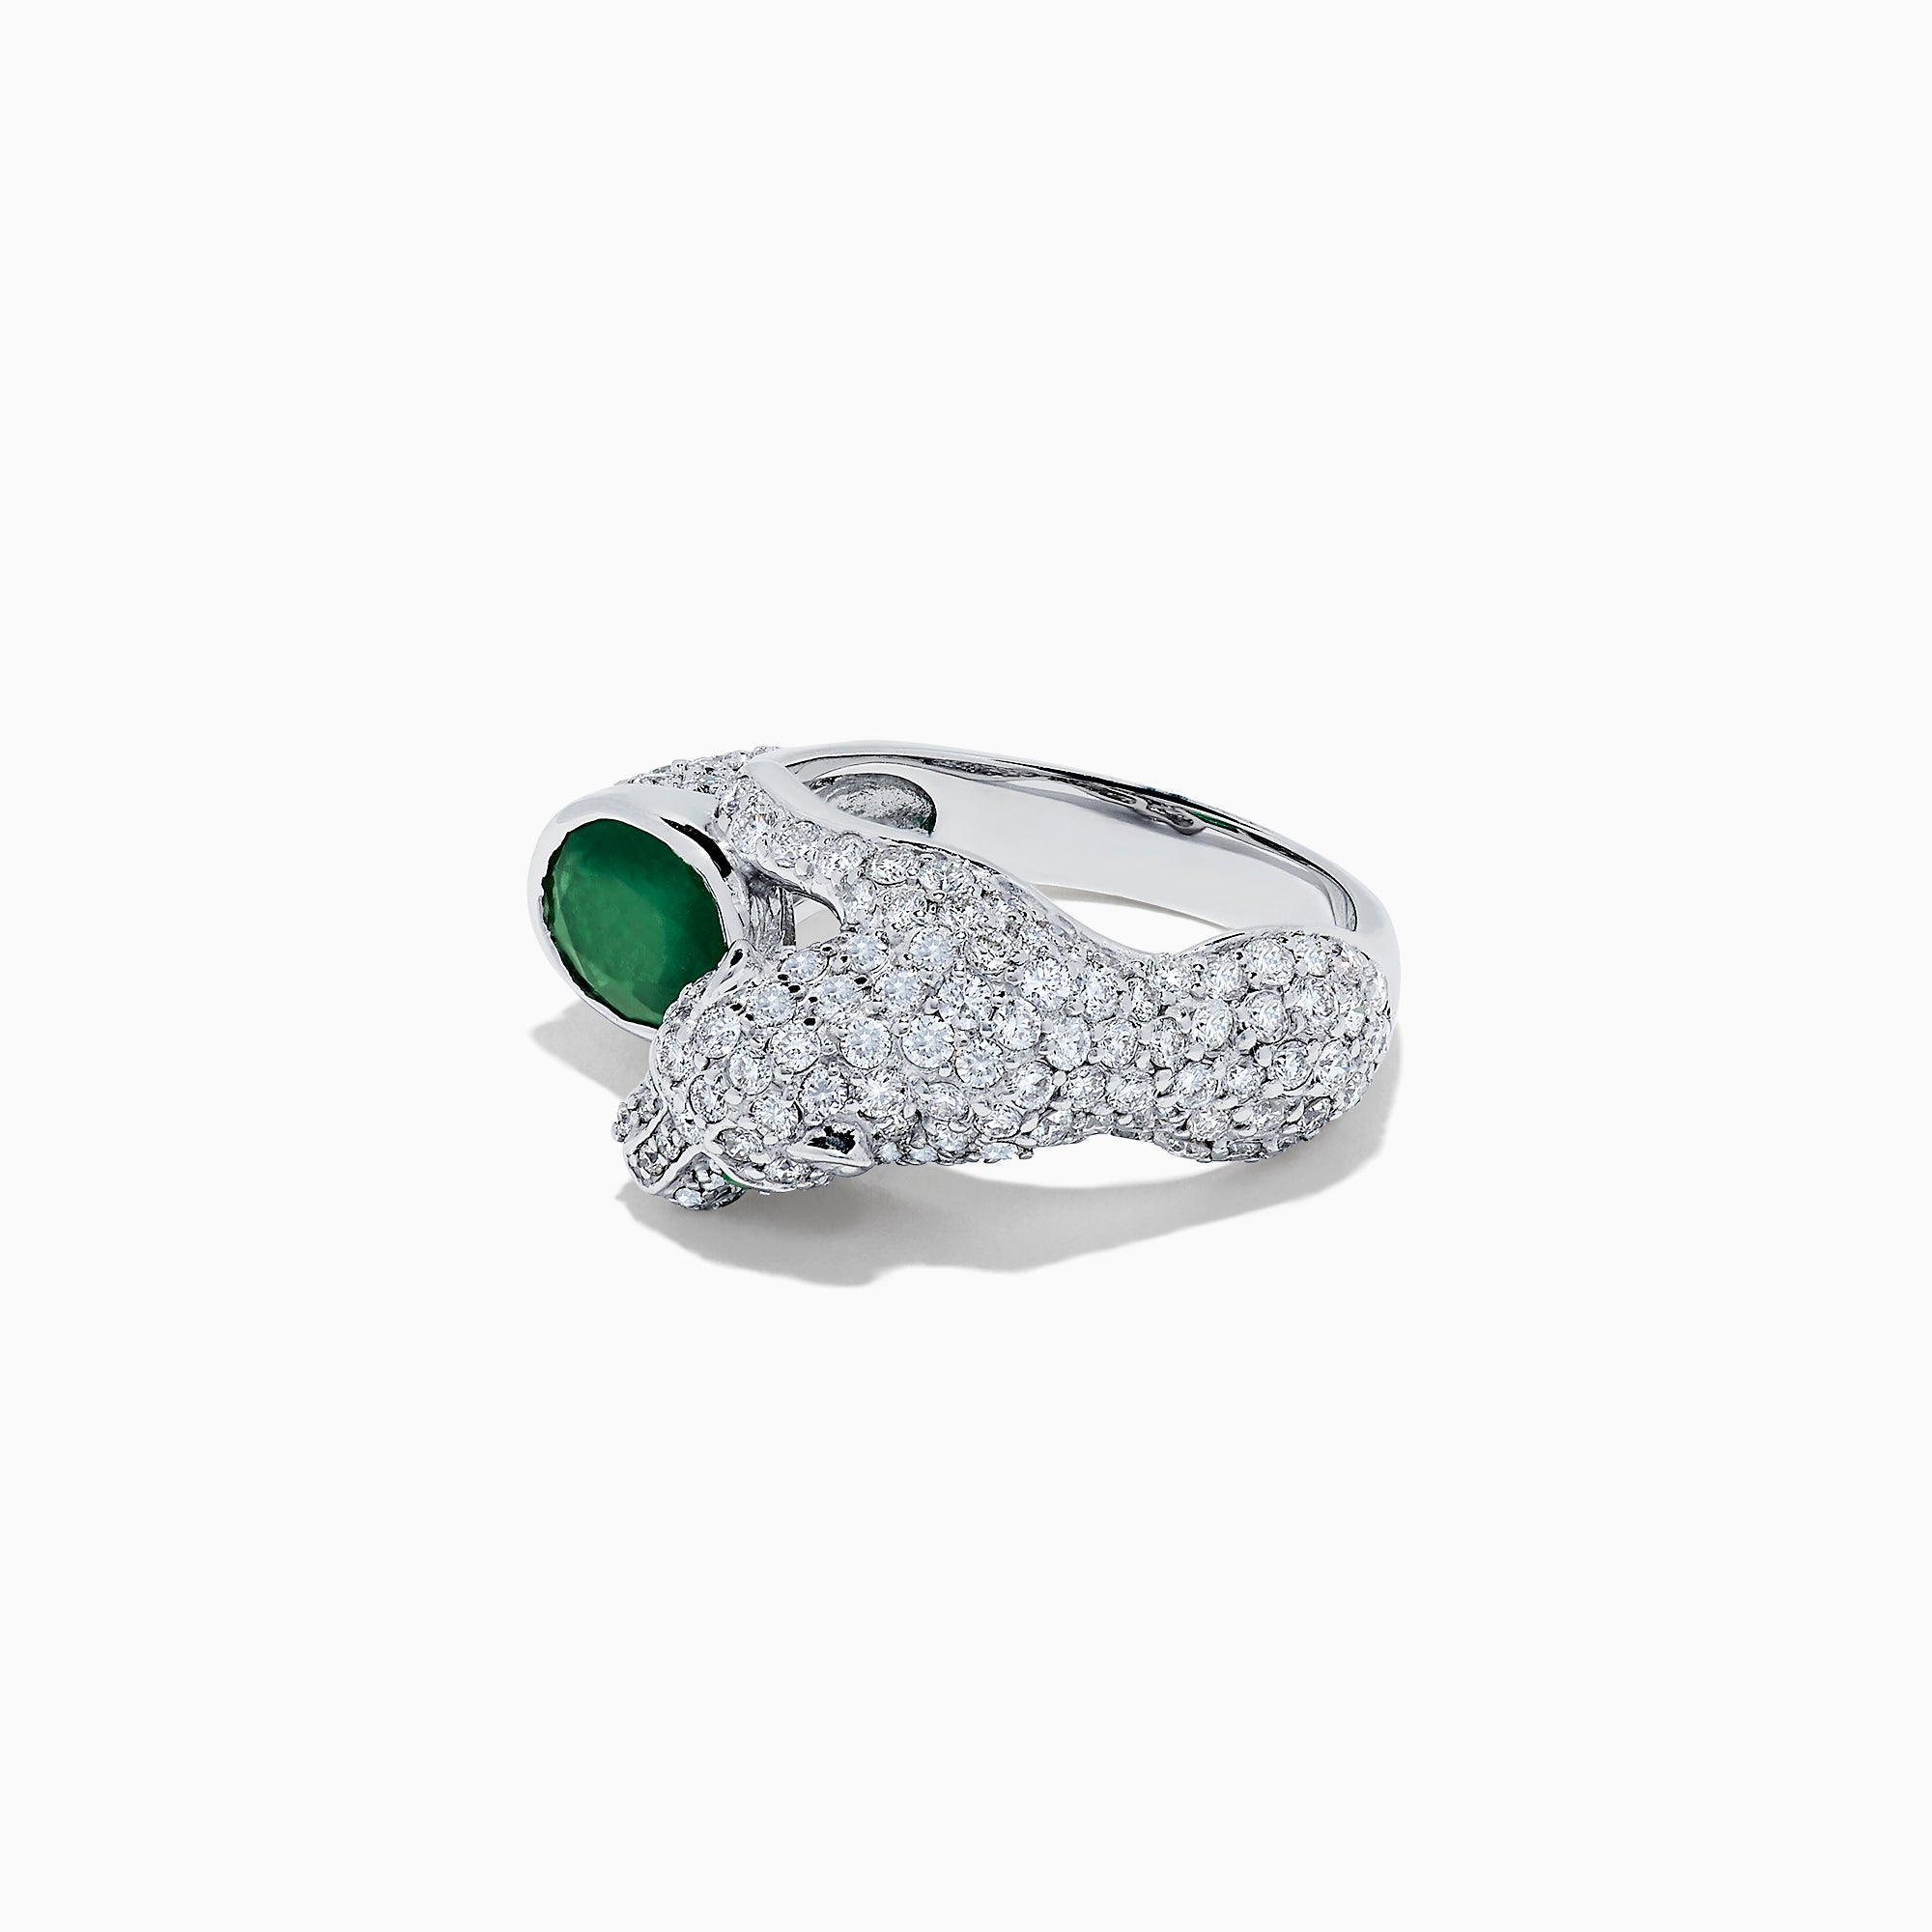 Effy Signature 14K White Gold Emerald and Diamond Panther Ring, 3.70 TCW